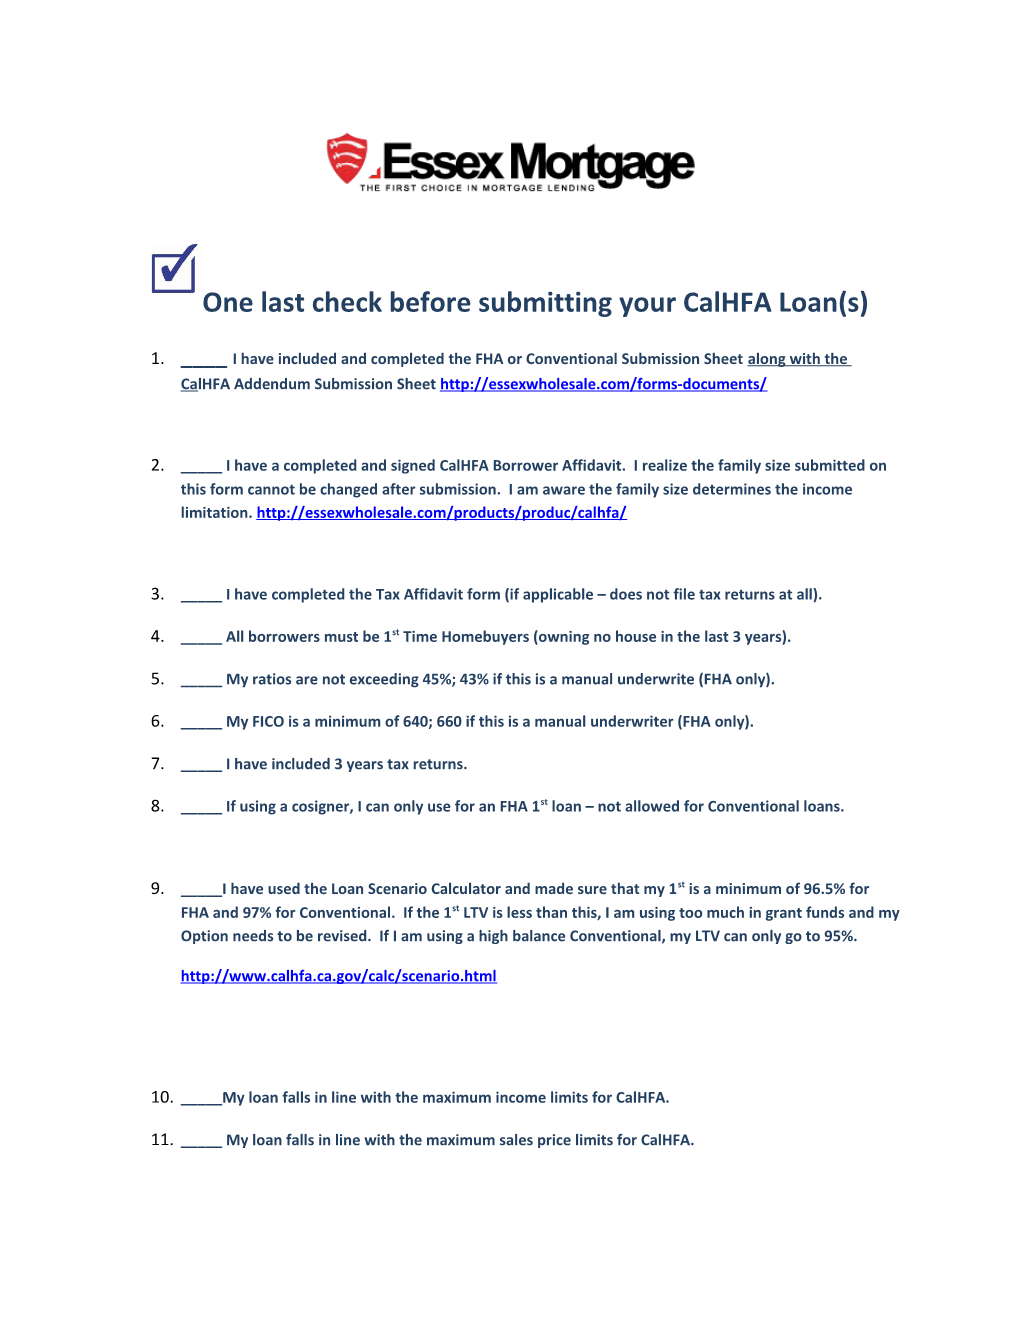 One Last Check Before Submitting Your Calhfa Loan(S)